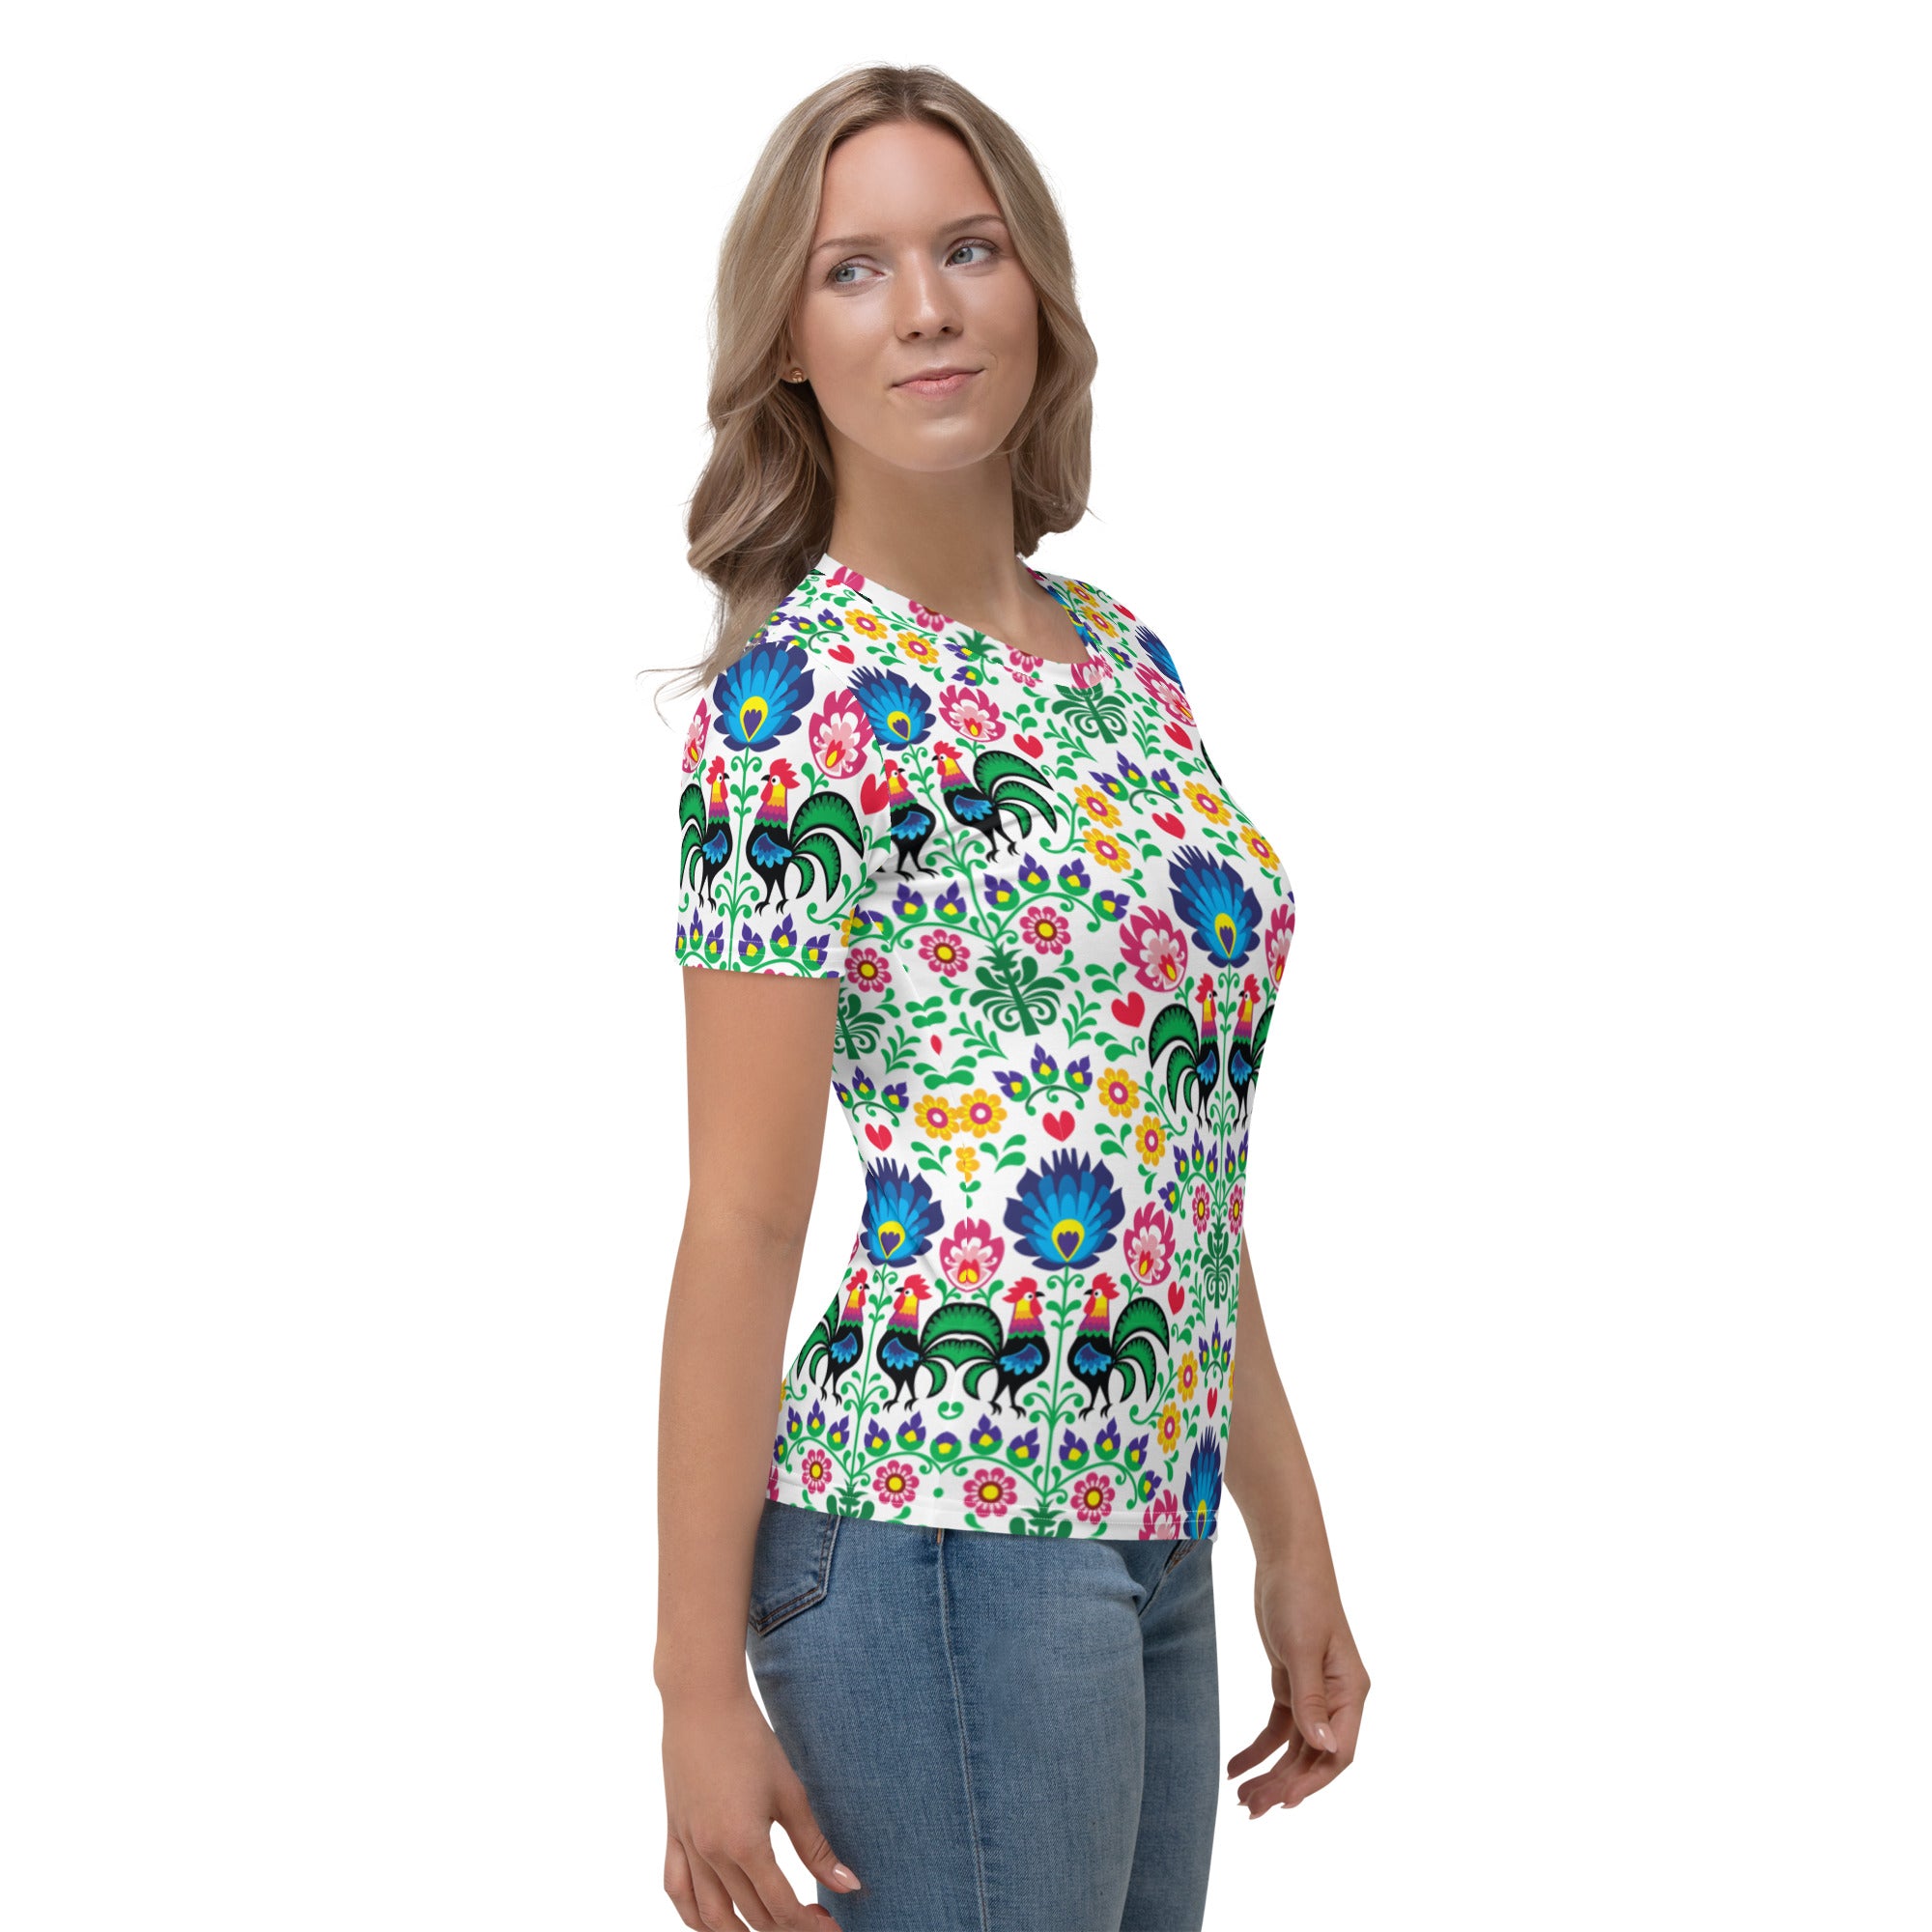 Wycinanki Rooster All Over Print Women's T-shirt  Polish Shirt Store   